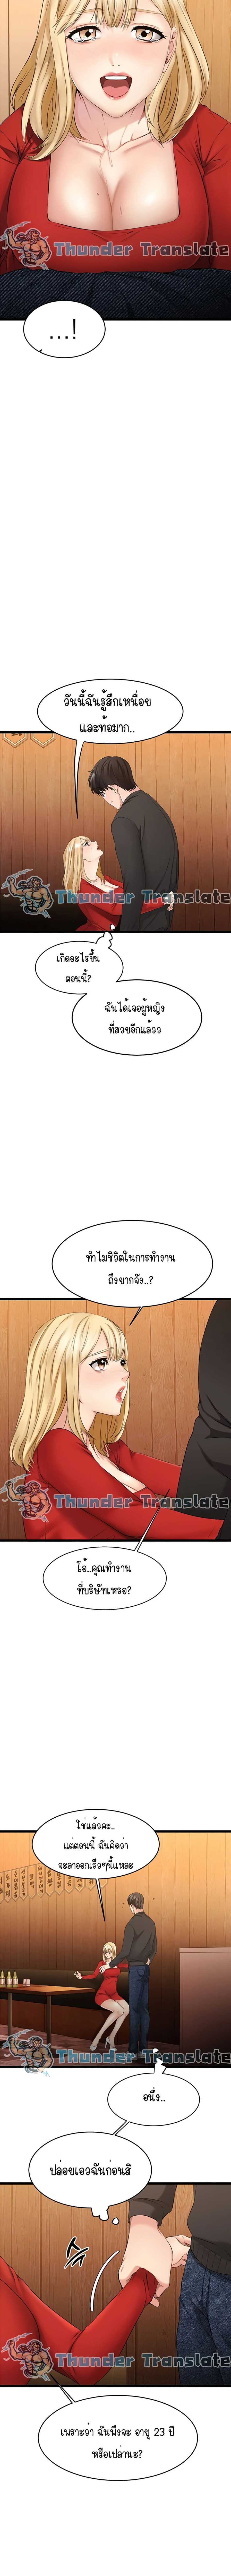 My Female Friend Who Crossed The Line 1 ภาพที่ 26